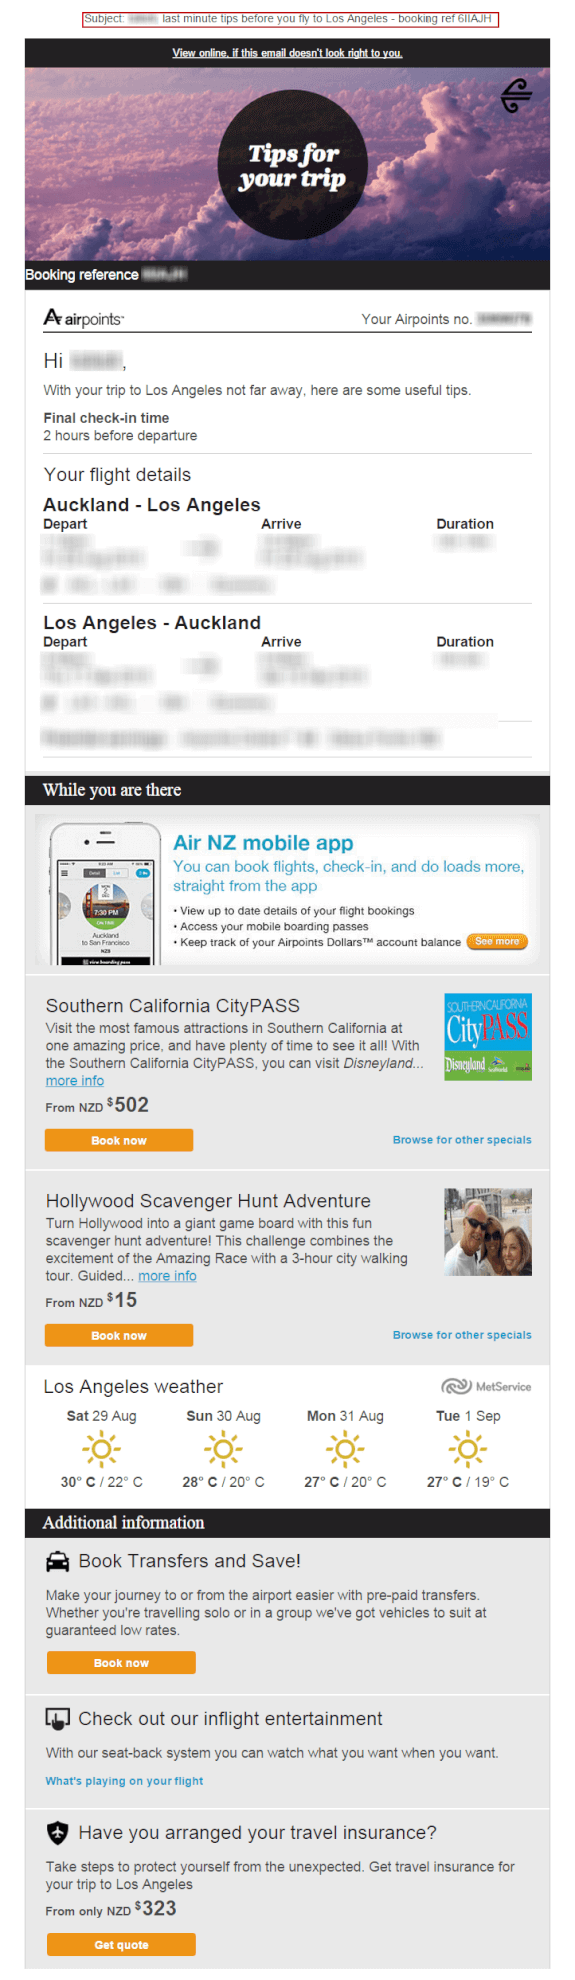 Air New Zealand personalisation example